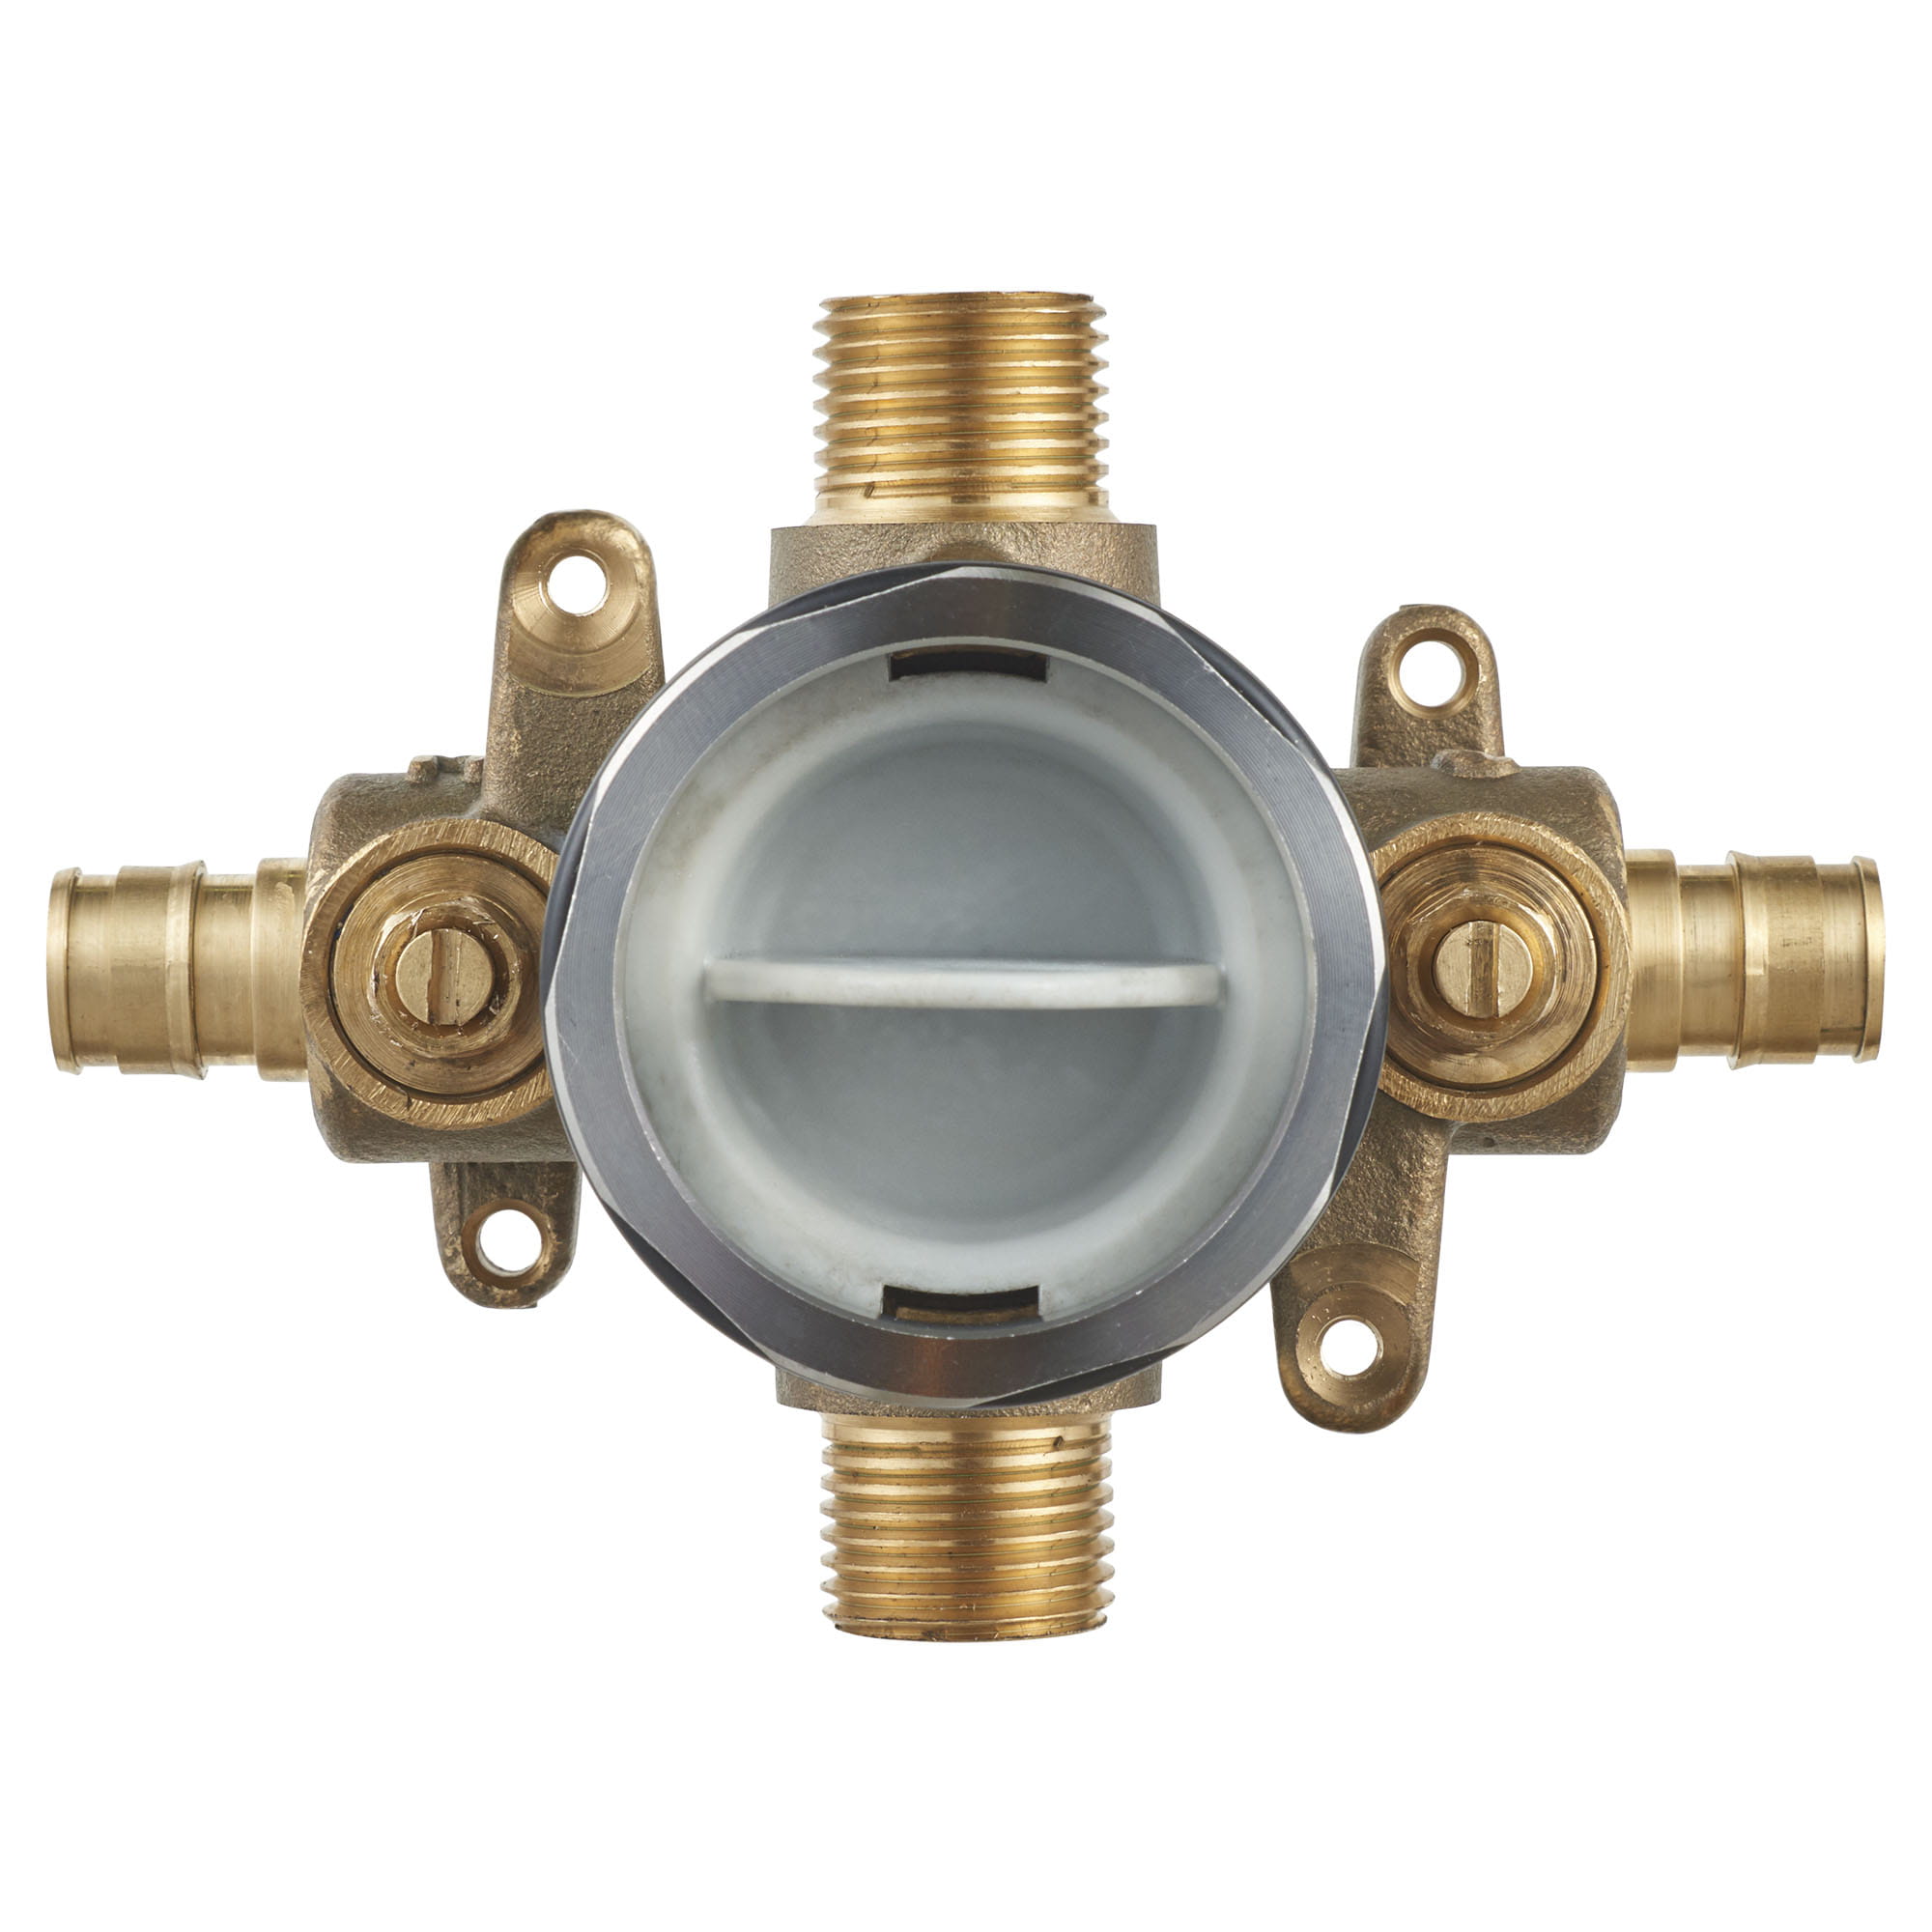 Flash® Shower Rough-In Valve With PEX Inlets/Universal Outlets With Screwdriver Stops for Cold Expansion System